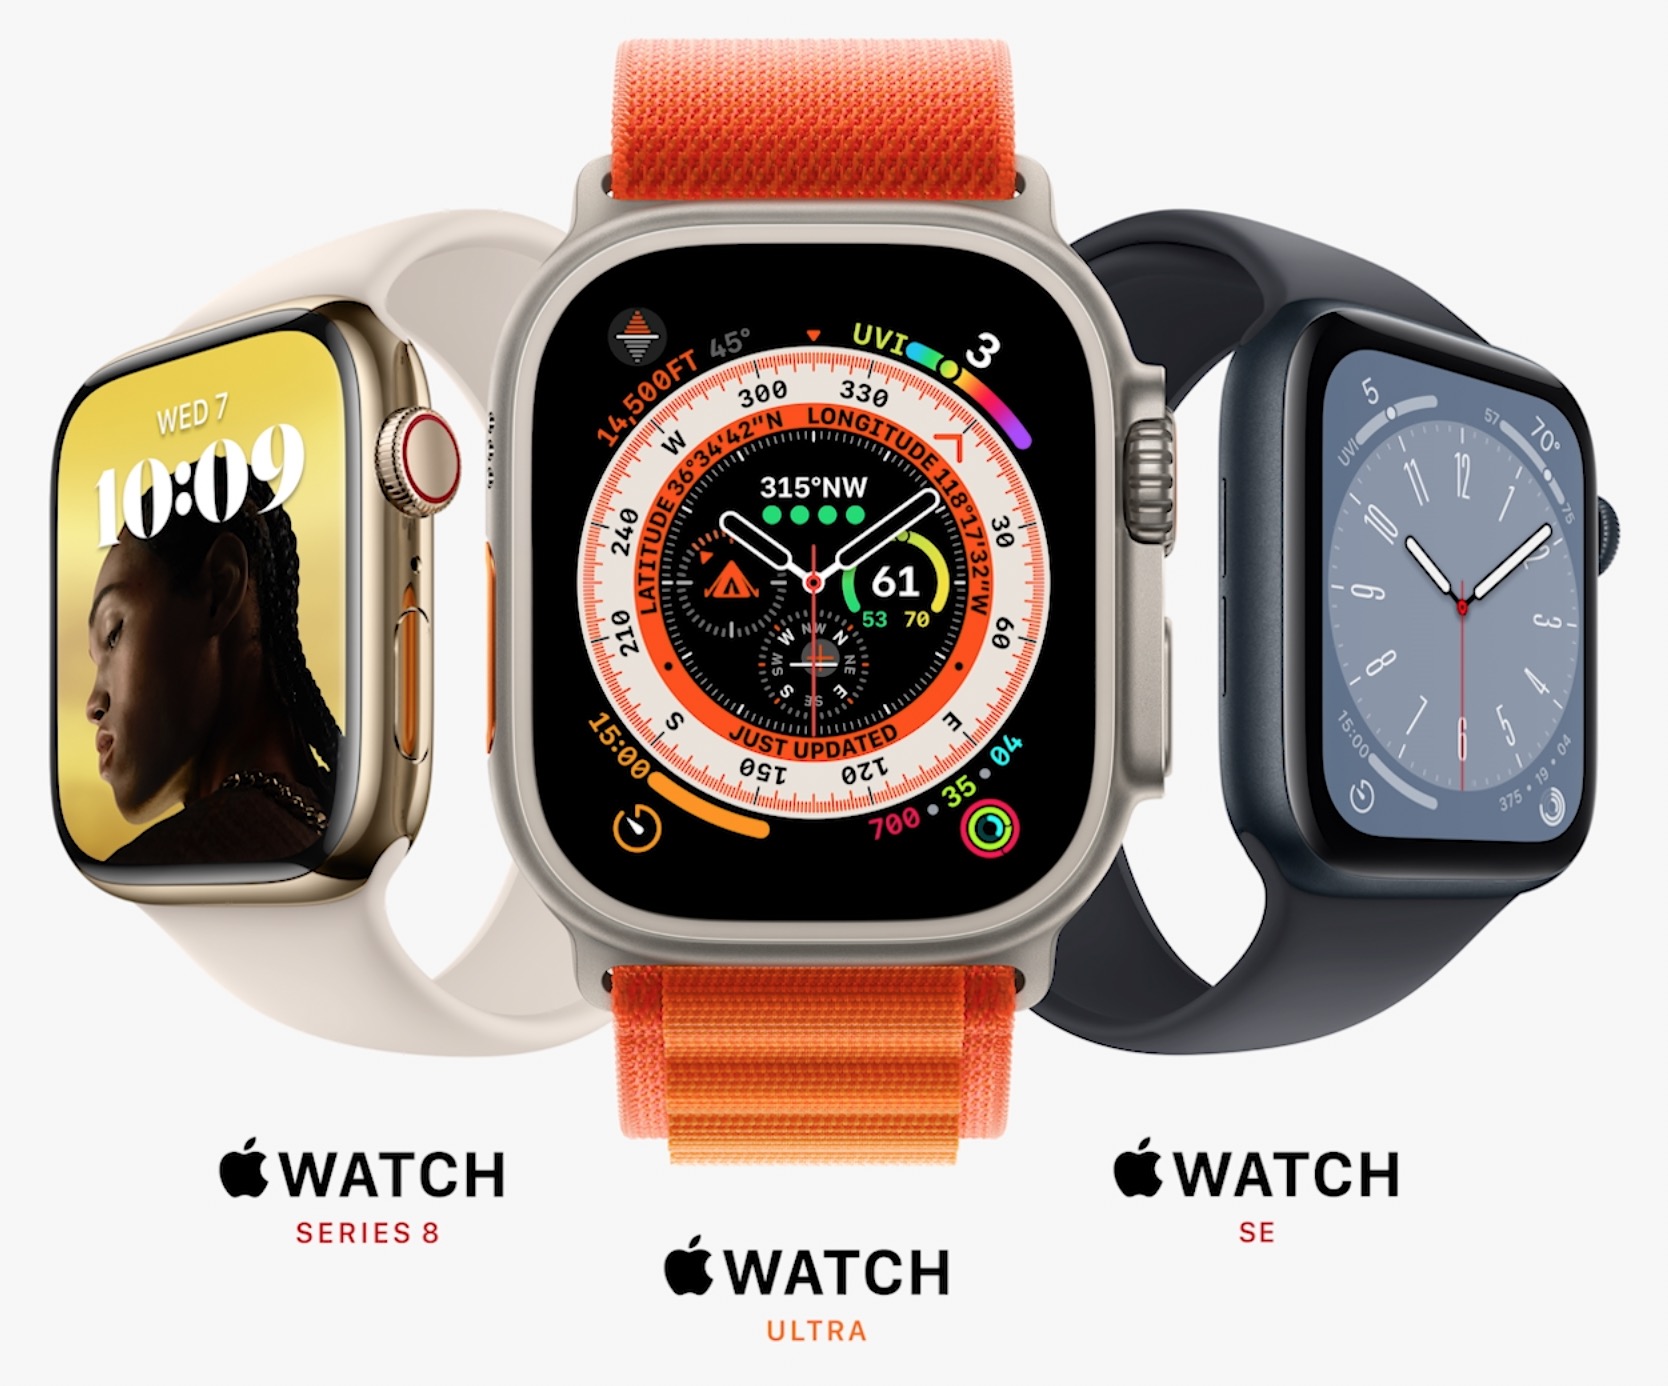 Apple Watch Series 8 and Apple Watch Ultra Expand Health, Safety, and